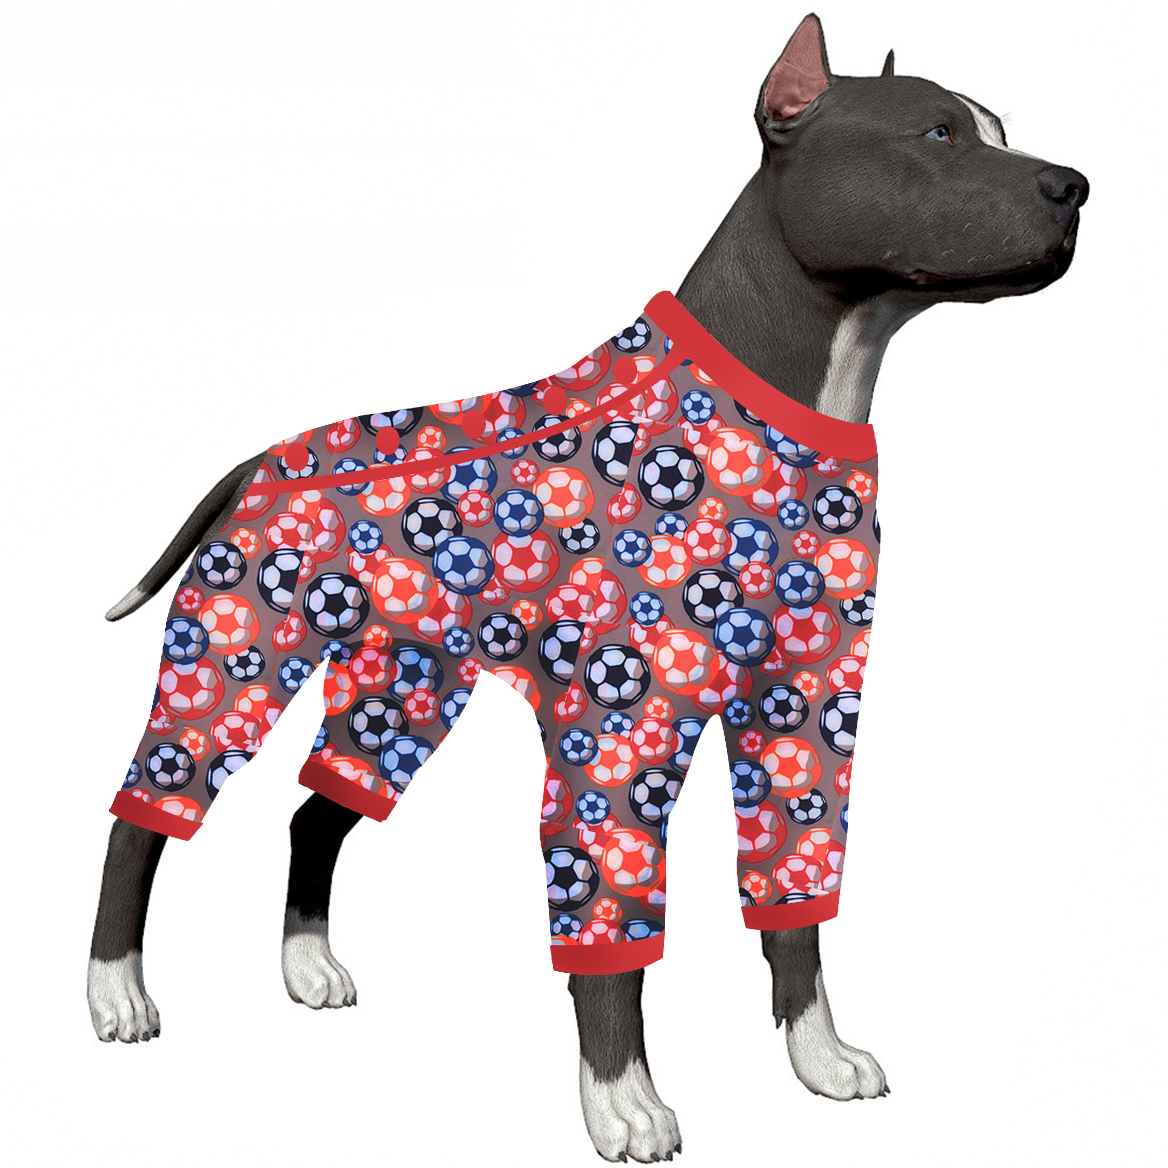 LovinPet Dog Pajamas,Wound Care, Anxiety Calm Dog Onesie under Dog Coats as Bottoming, Lightweight Soft 4 Legged Large Dog Jammies, Stretchable Soccer Balls Tan Prints Pjs for Dogs